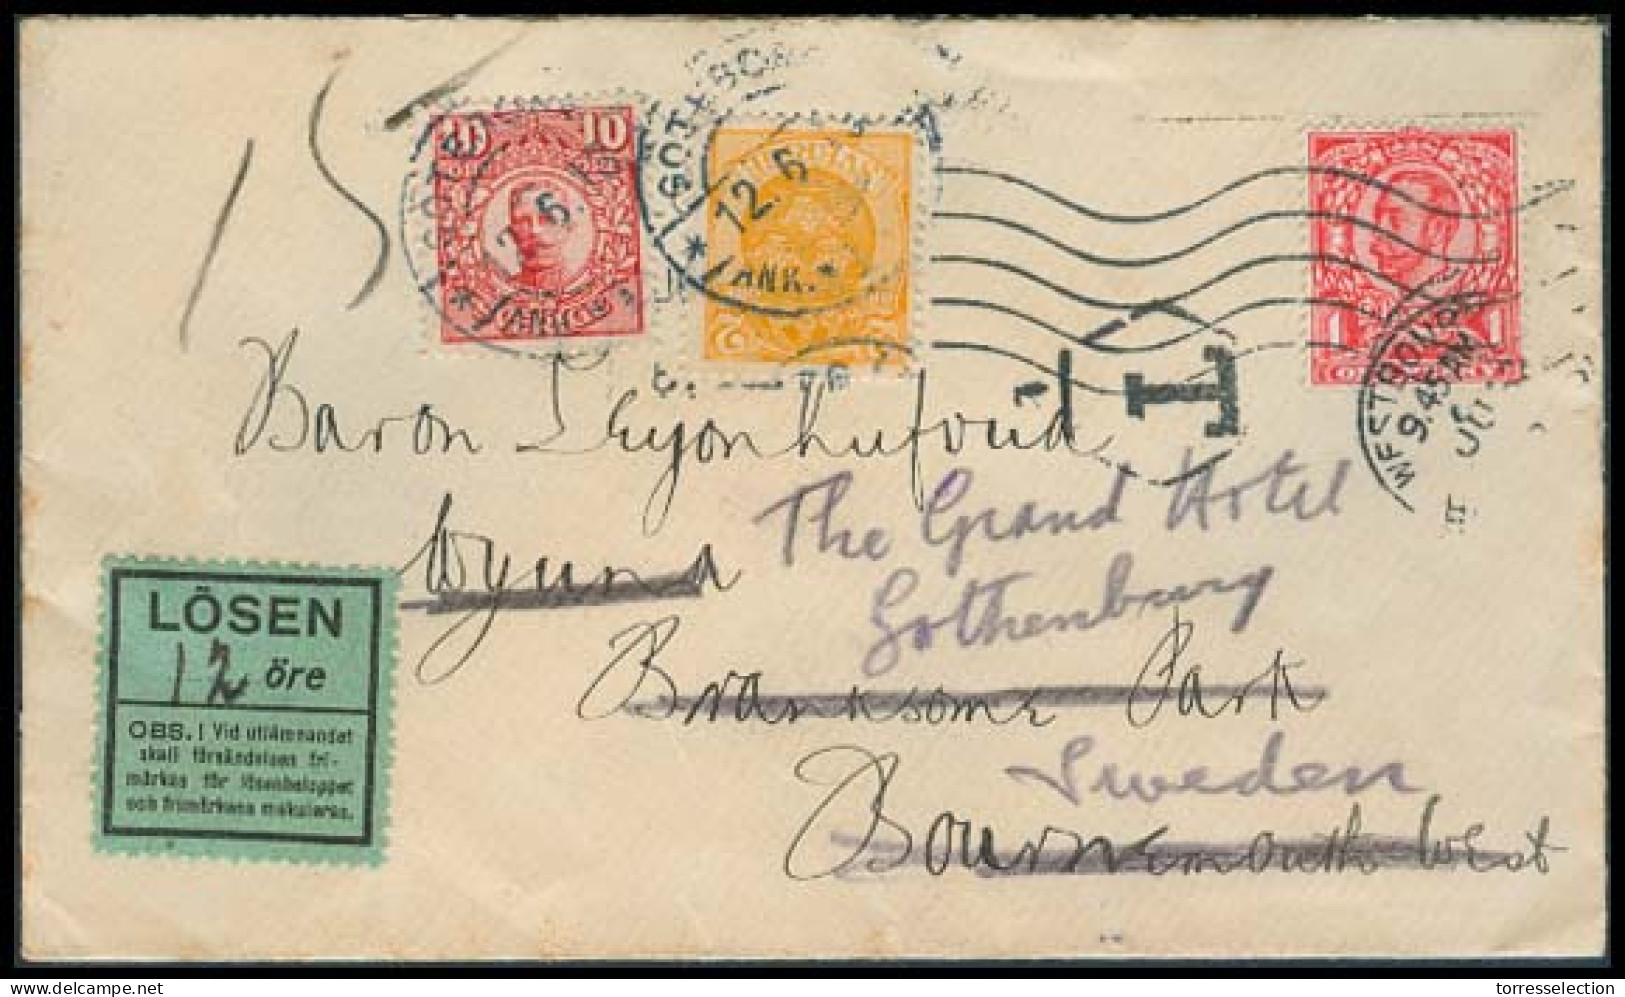 Great Britain - XX. 1913. GB - Sweden. Fkd Env + Taxed + Swedish Label Due + 12 Ore Stamps Tied Cds Nice Comb. - ...-1840 Voorlopers